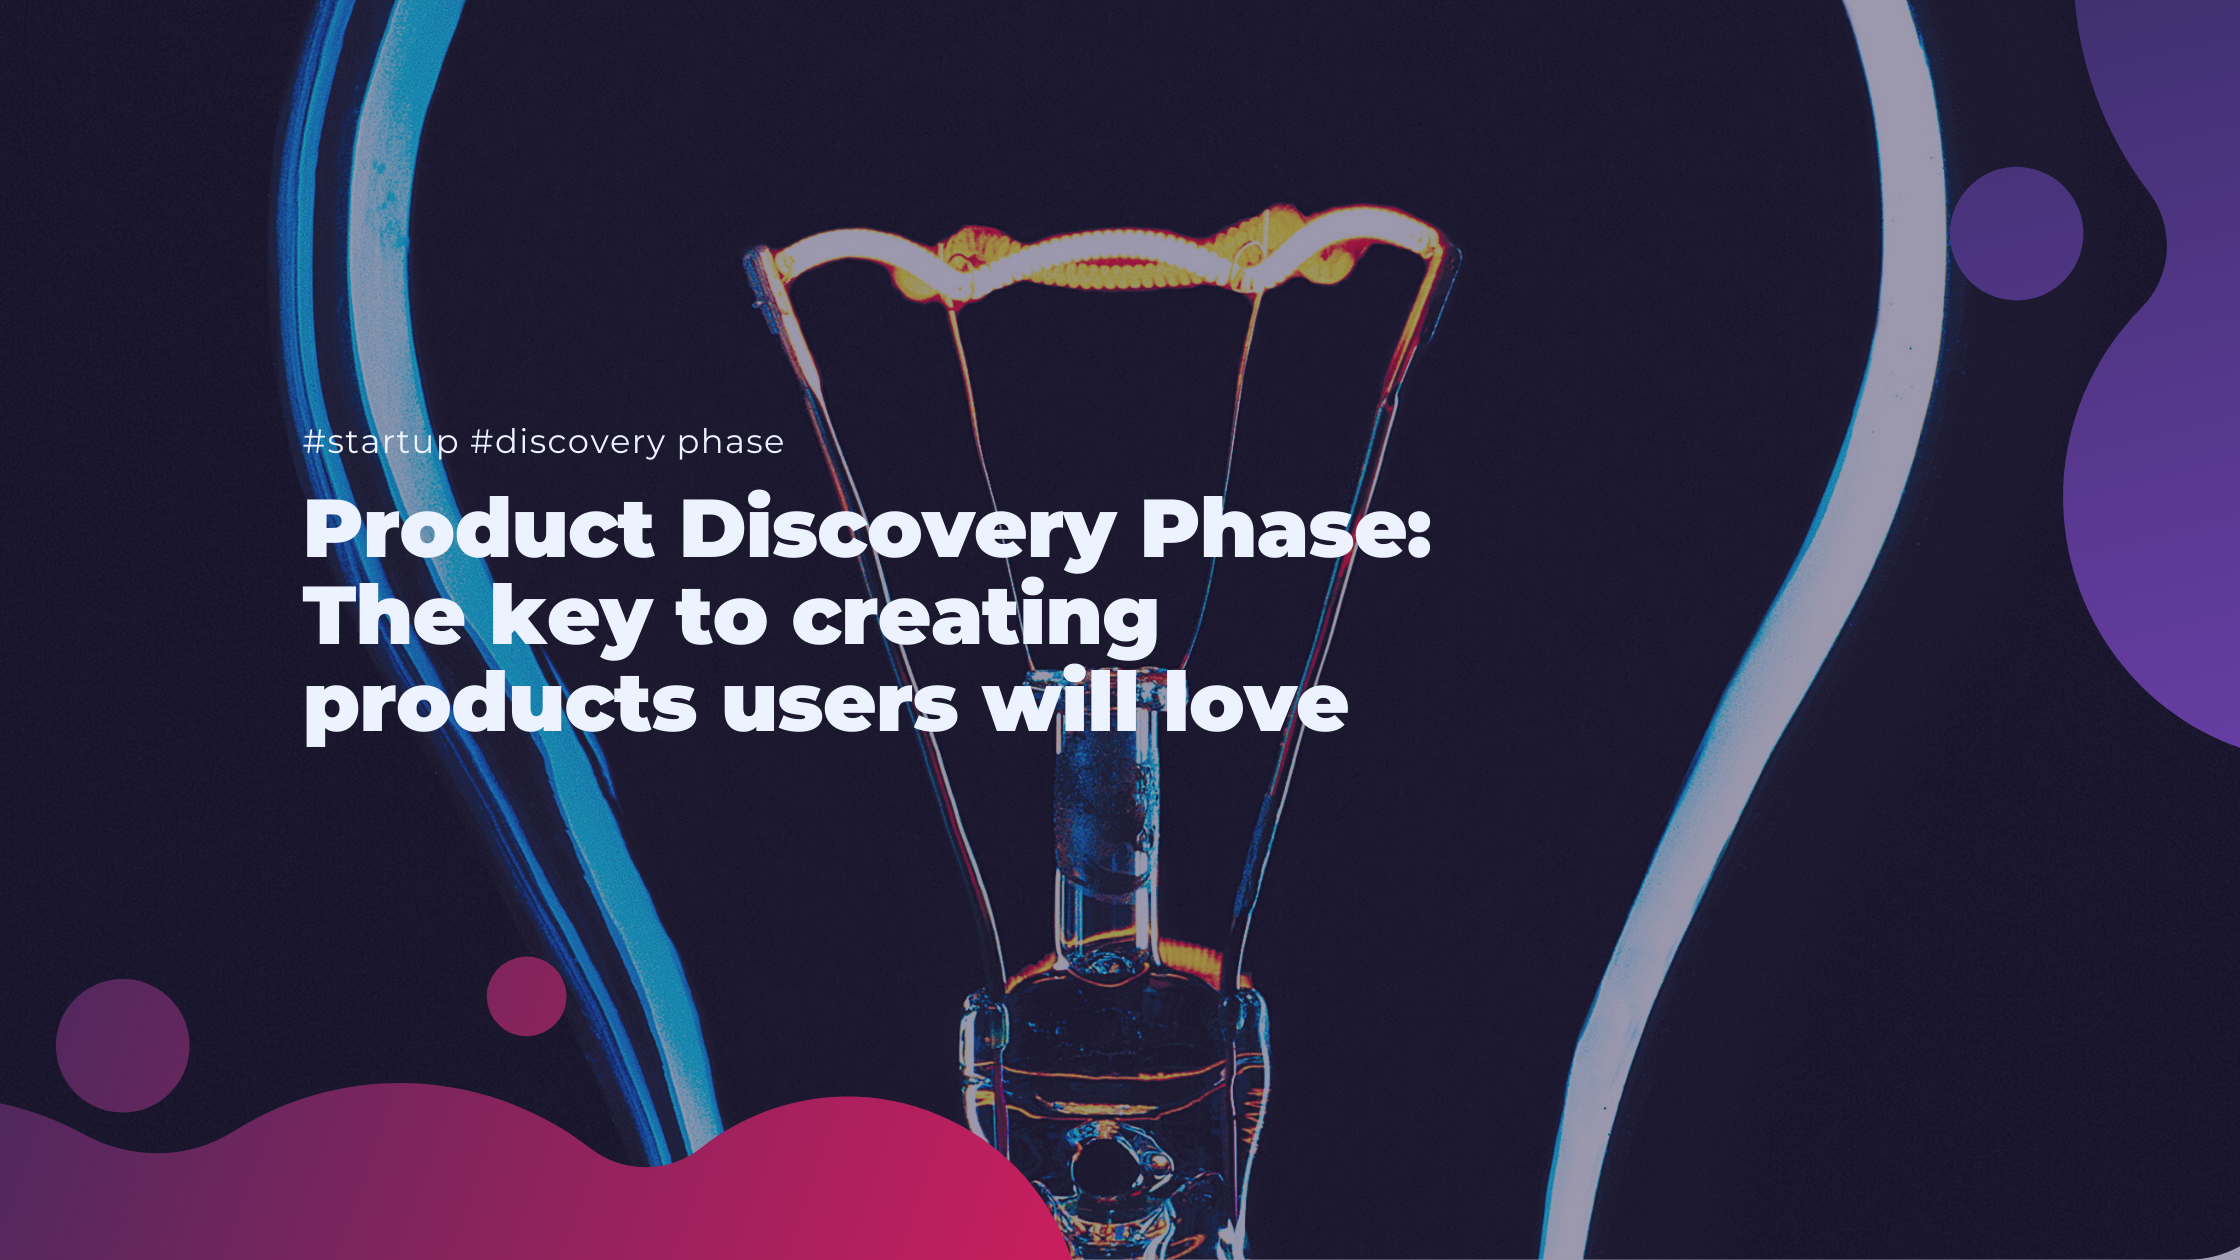 Product discovery phase: The key to creating products users will love